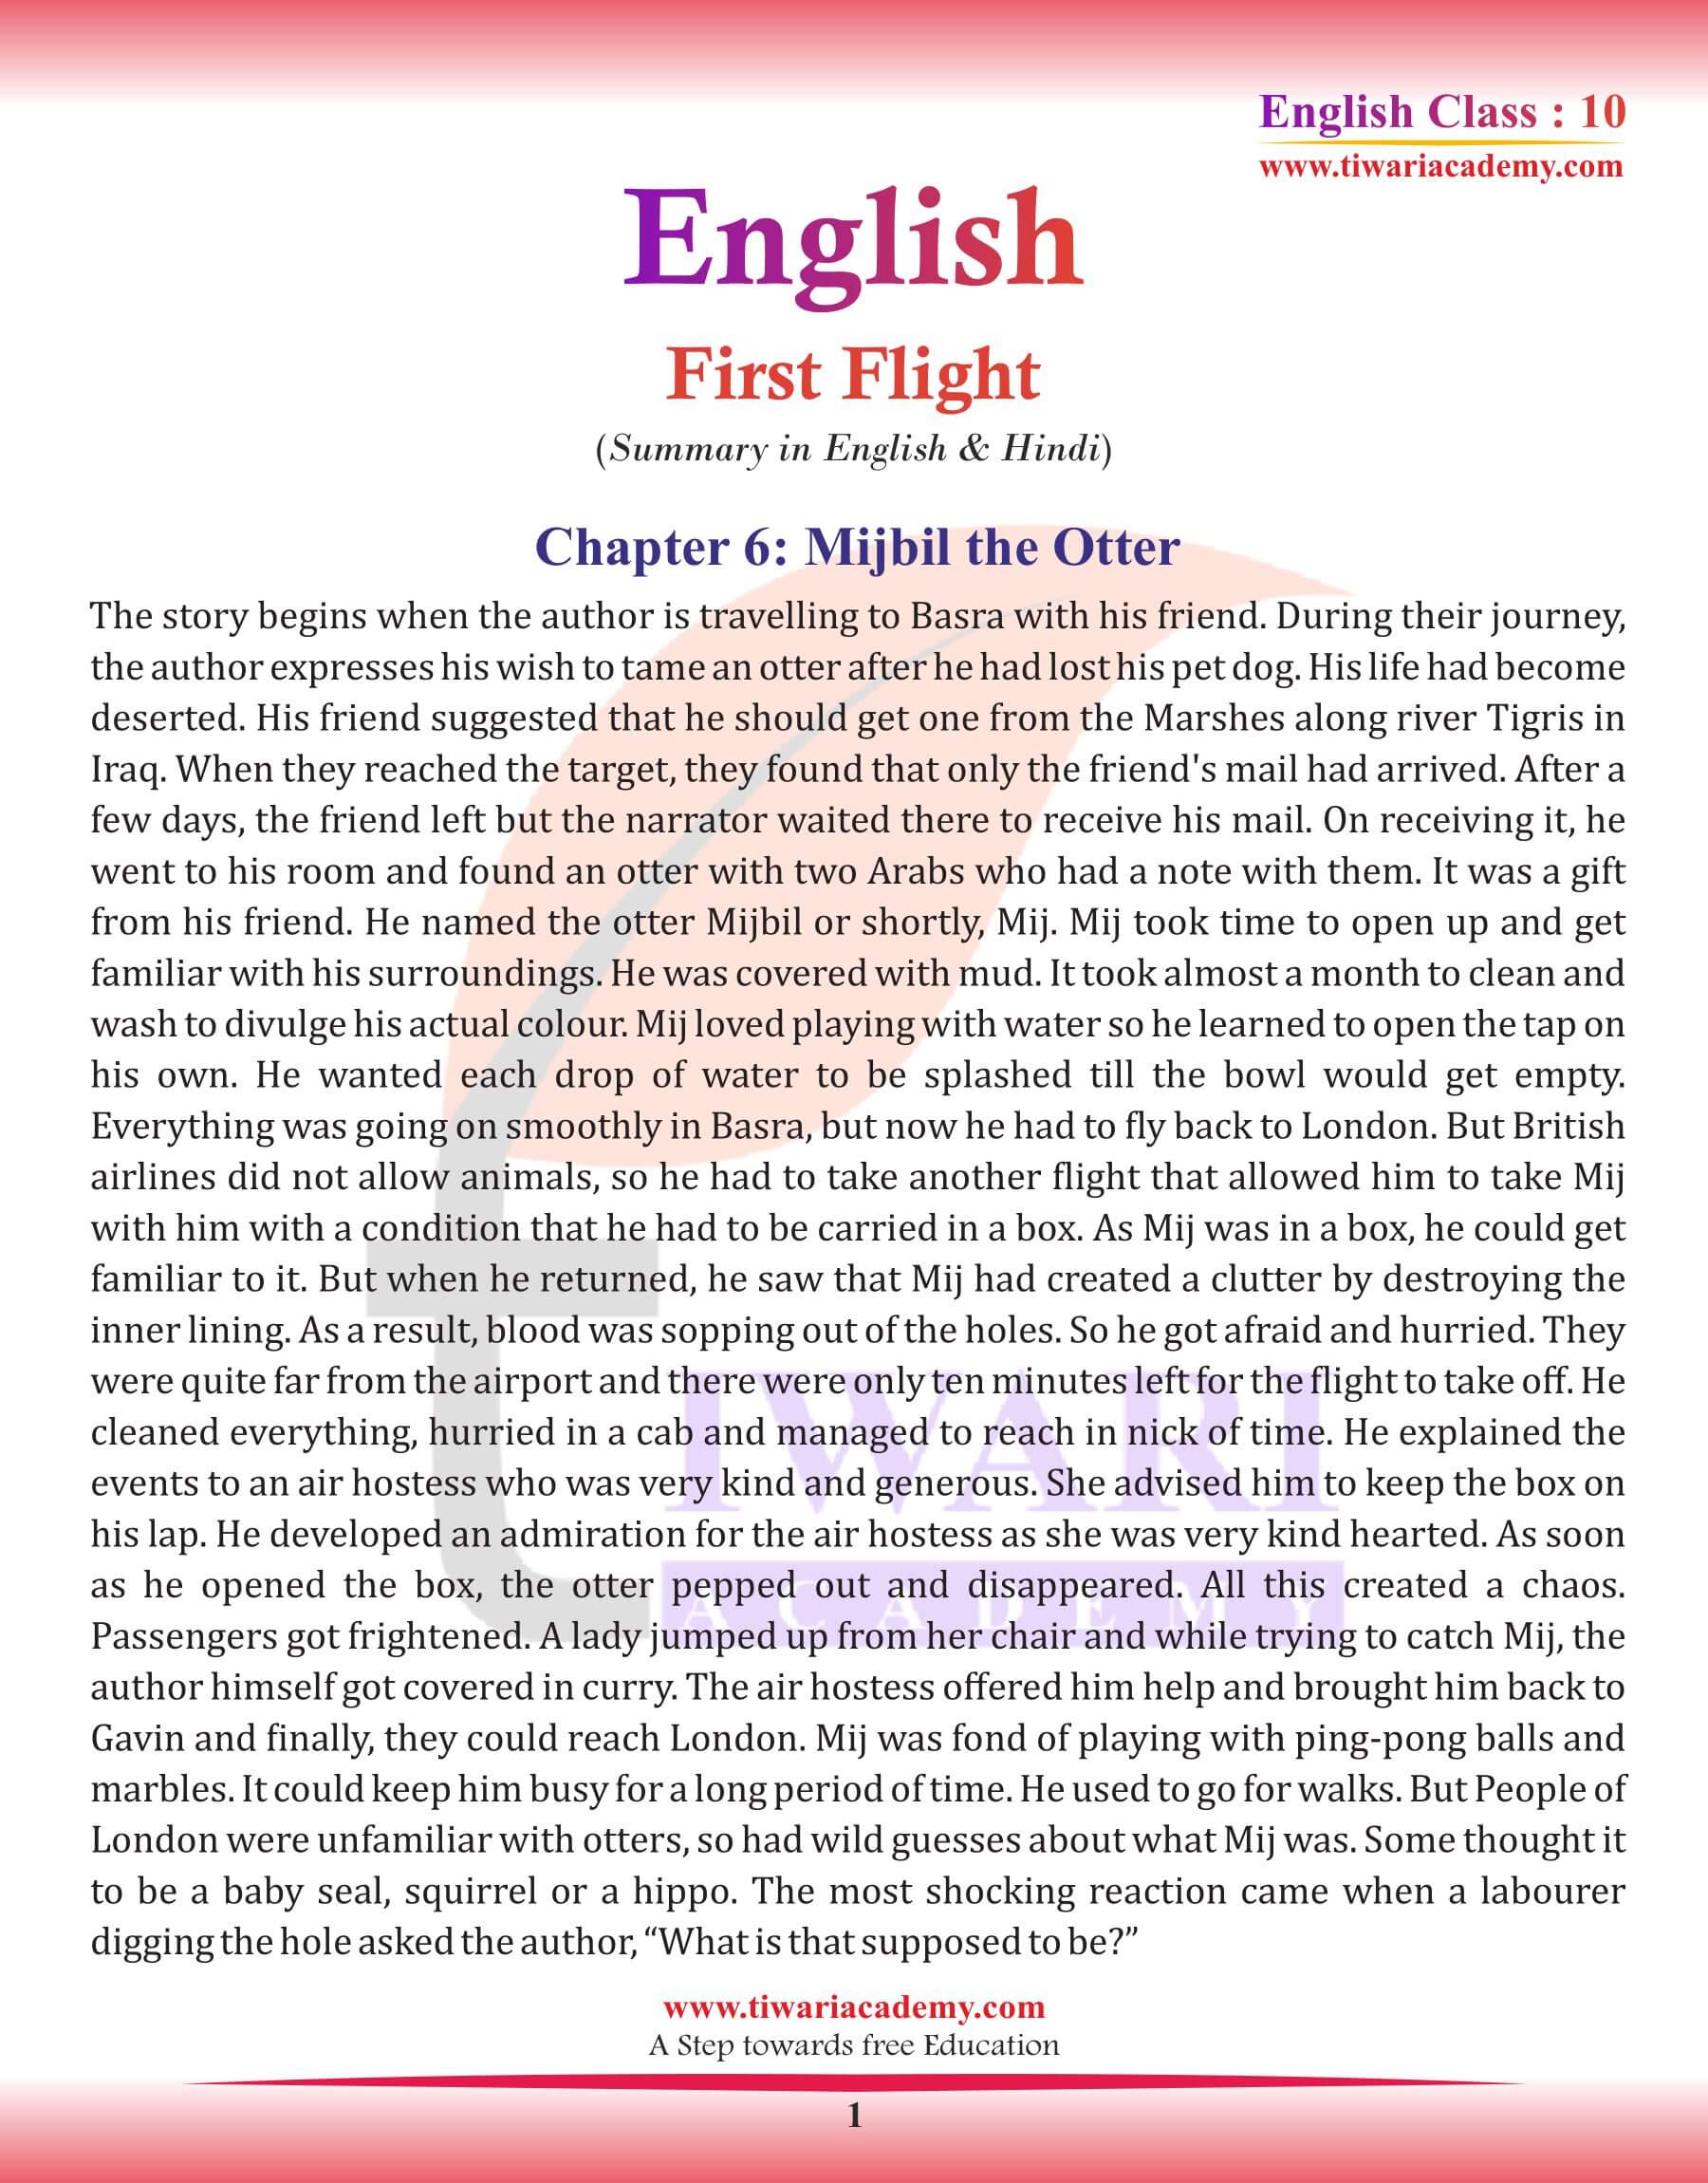 Class 10 English Chapter 6 Summery in English